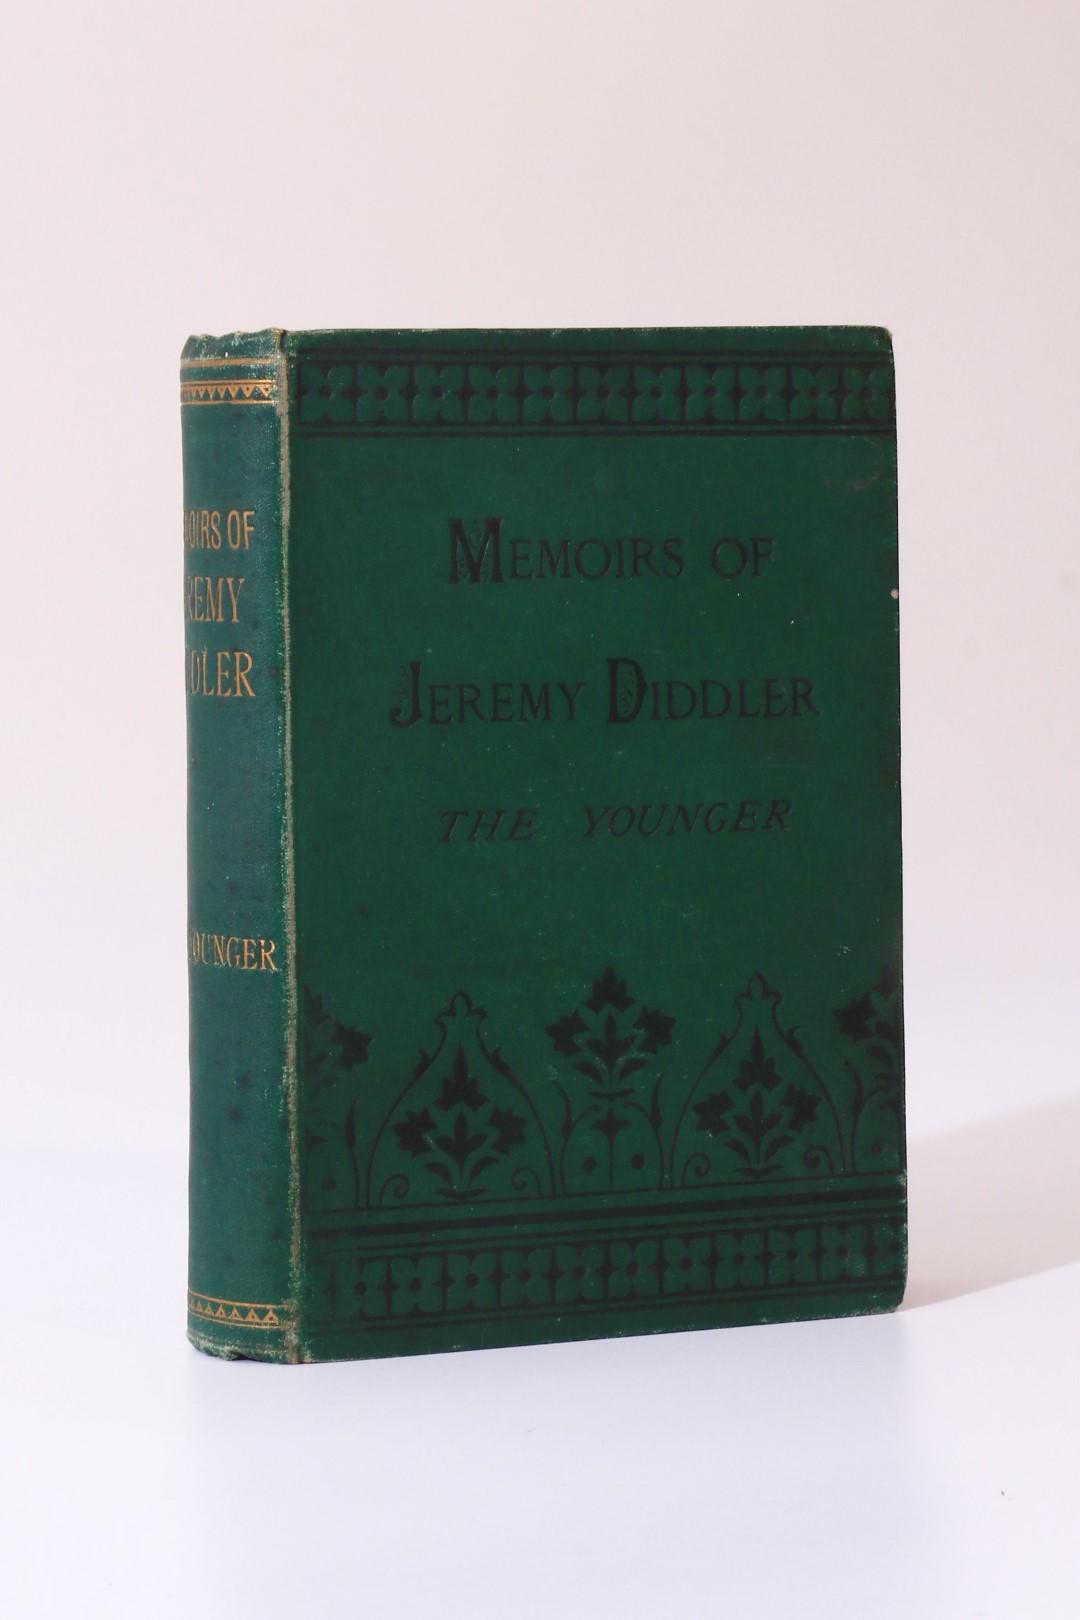 Anonymous - Memoirs of Jeremy Diddler the Younger - Sampson Low, Marston, Searle, & Rivington, 1887, First Edition.